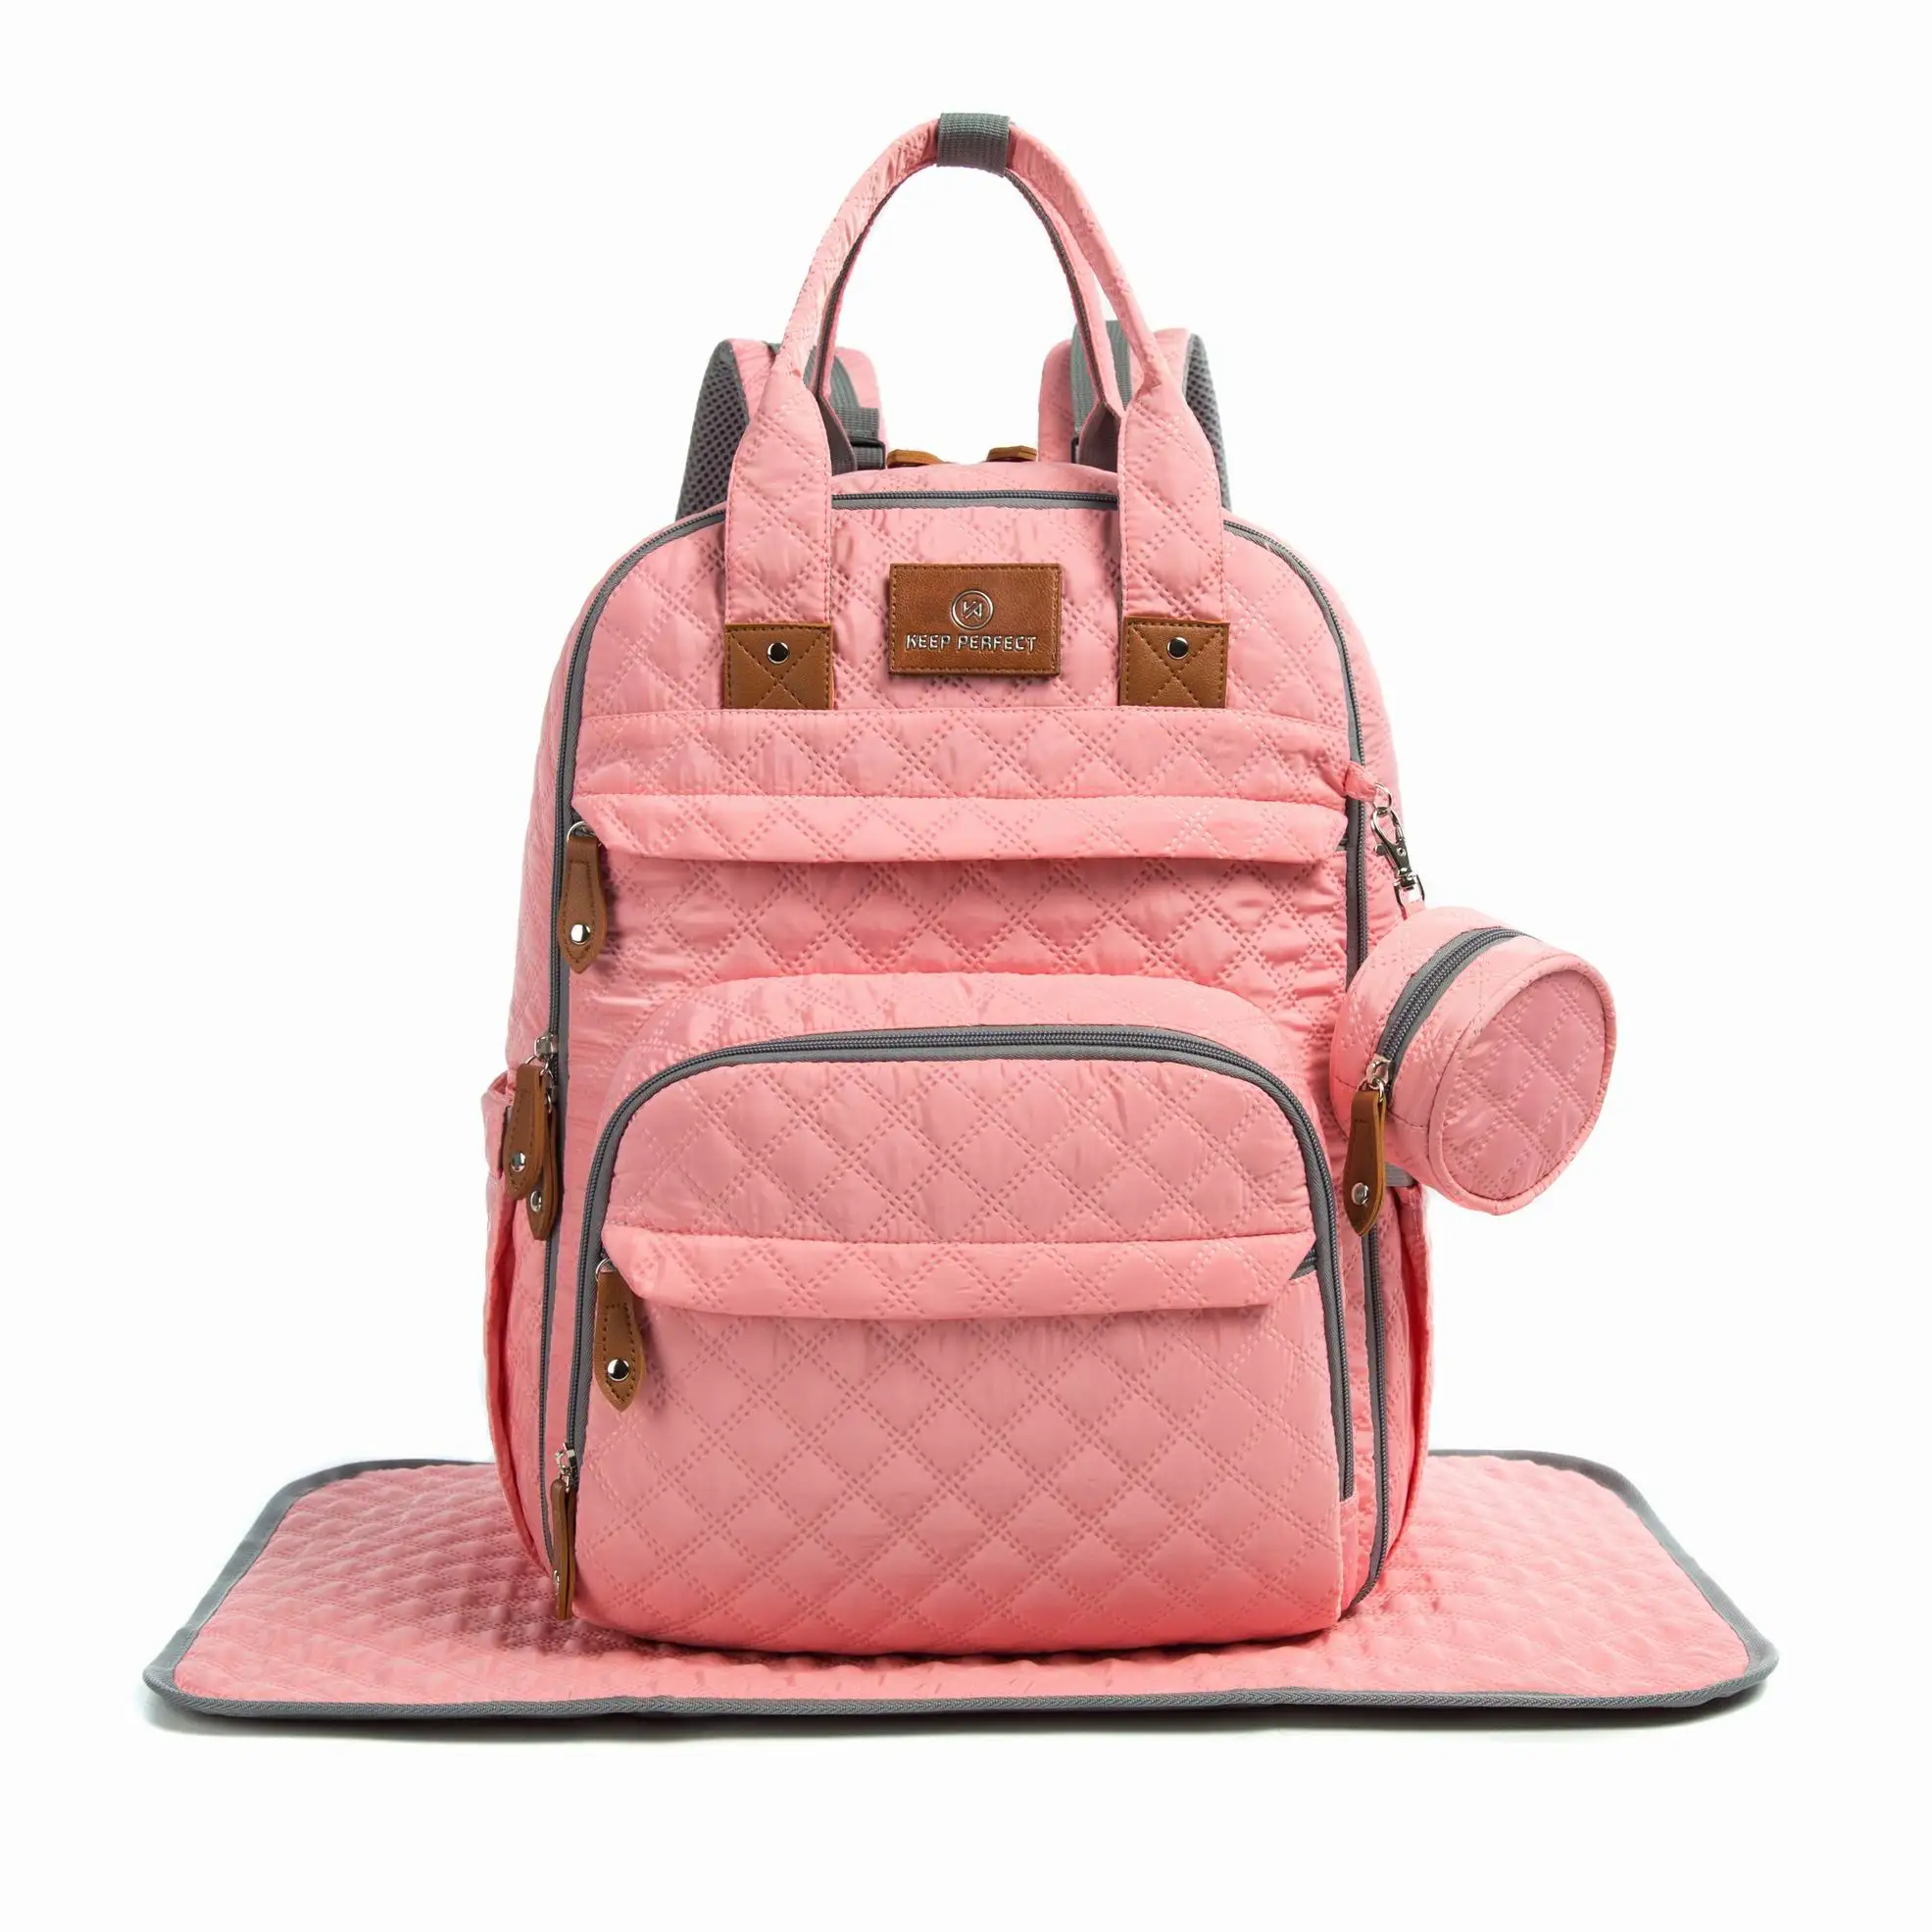 

Sac A Langer Diaper Bag Backpack Travel Back Pack Maternity Baby Nappy Changing Bags Large Capacity, Contact supplier